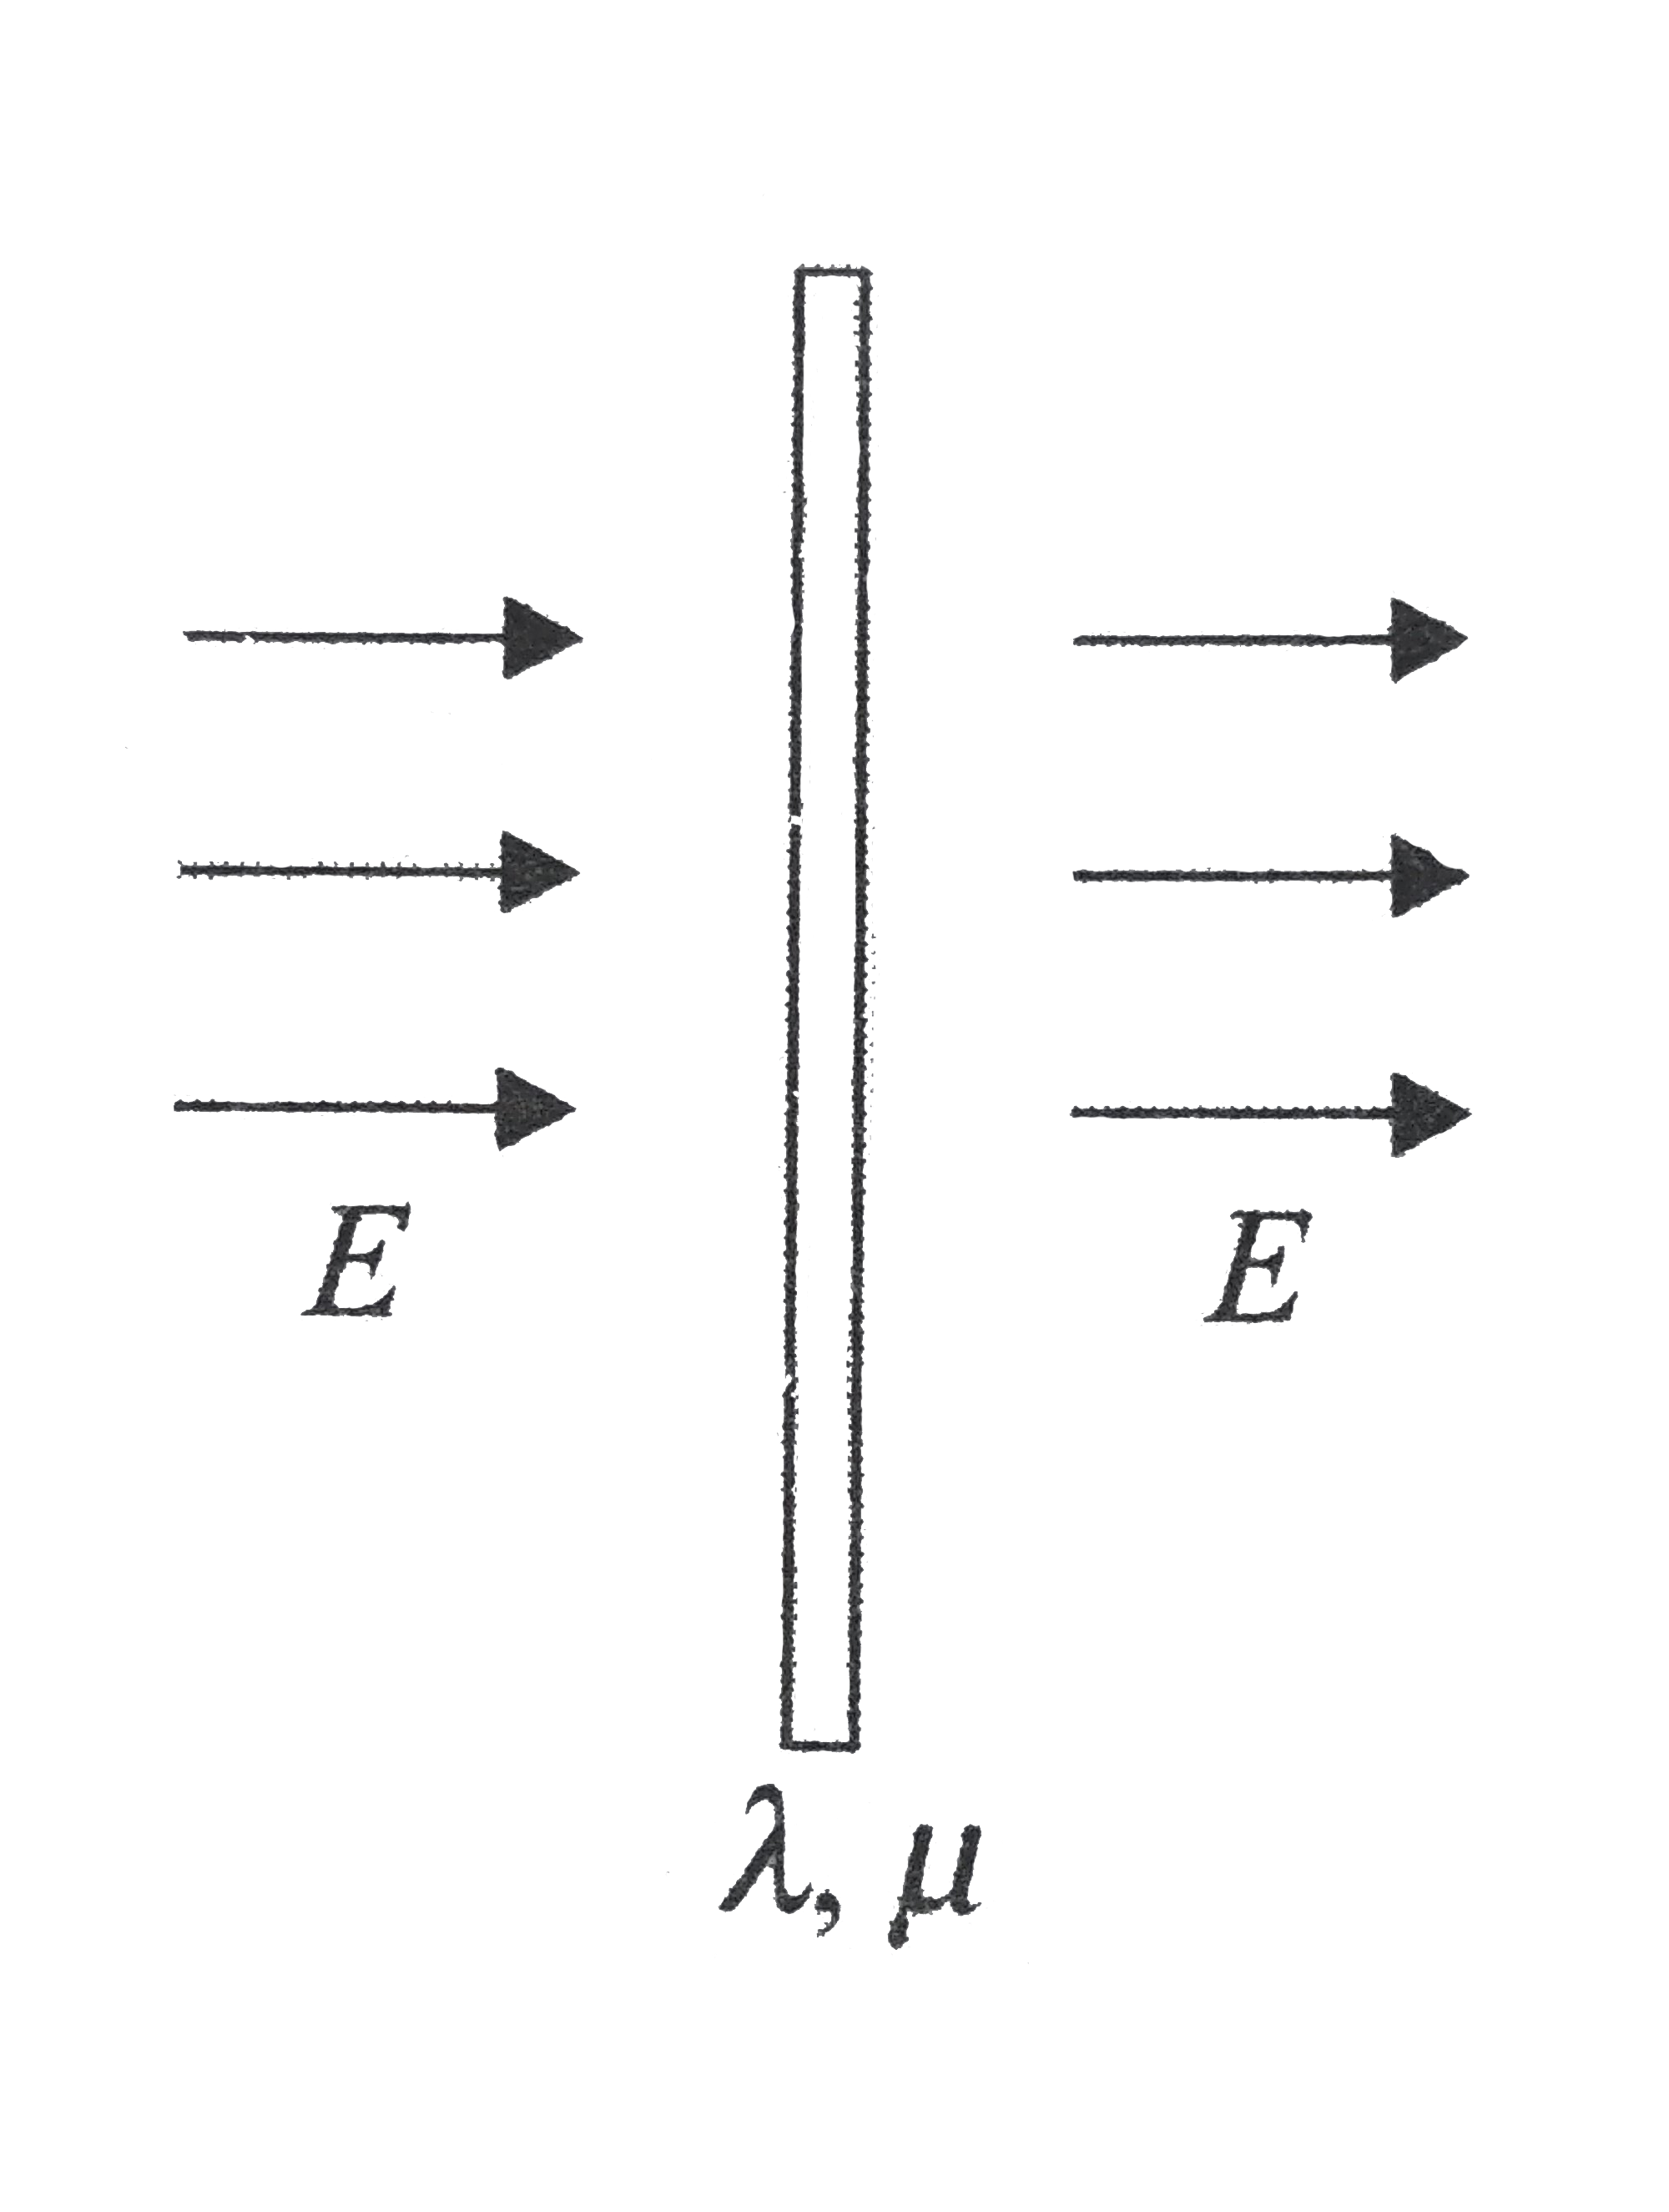 An insulating rod having linear charge density lambda = 40.0 mu Cm^-1 and linear mass density mu = 0.100 kg m^-1 is released from rest in a uniform electric field E = 100 Vm^(-1) directed perpendicular to the rod.   (a) Determine the speed of the rod after it has travelled 2.00 m   (b) How does your answer to part (a) change if the electric field is not perpendicular to the rod ?